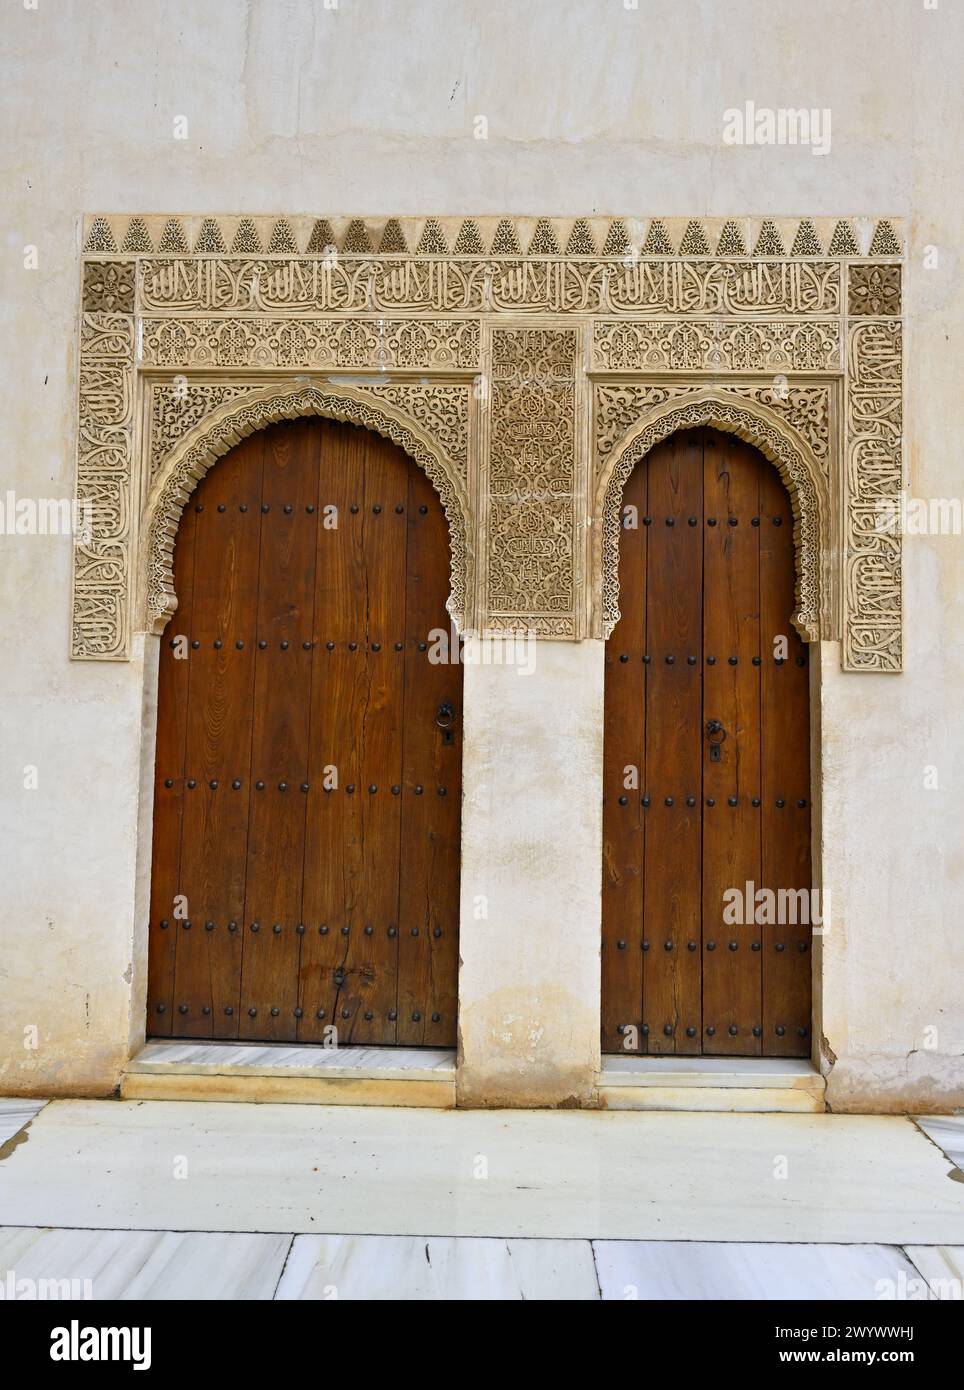 Moorish-style elaborate plasterwork and two arched wooden door inside Court of the Myrtles,  Nasrid Palaces, Alhambra Palace, Granada, Spain Stock Photo